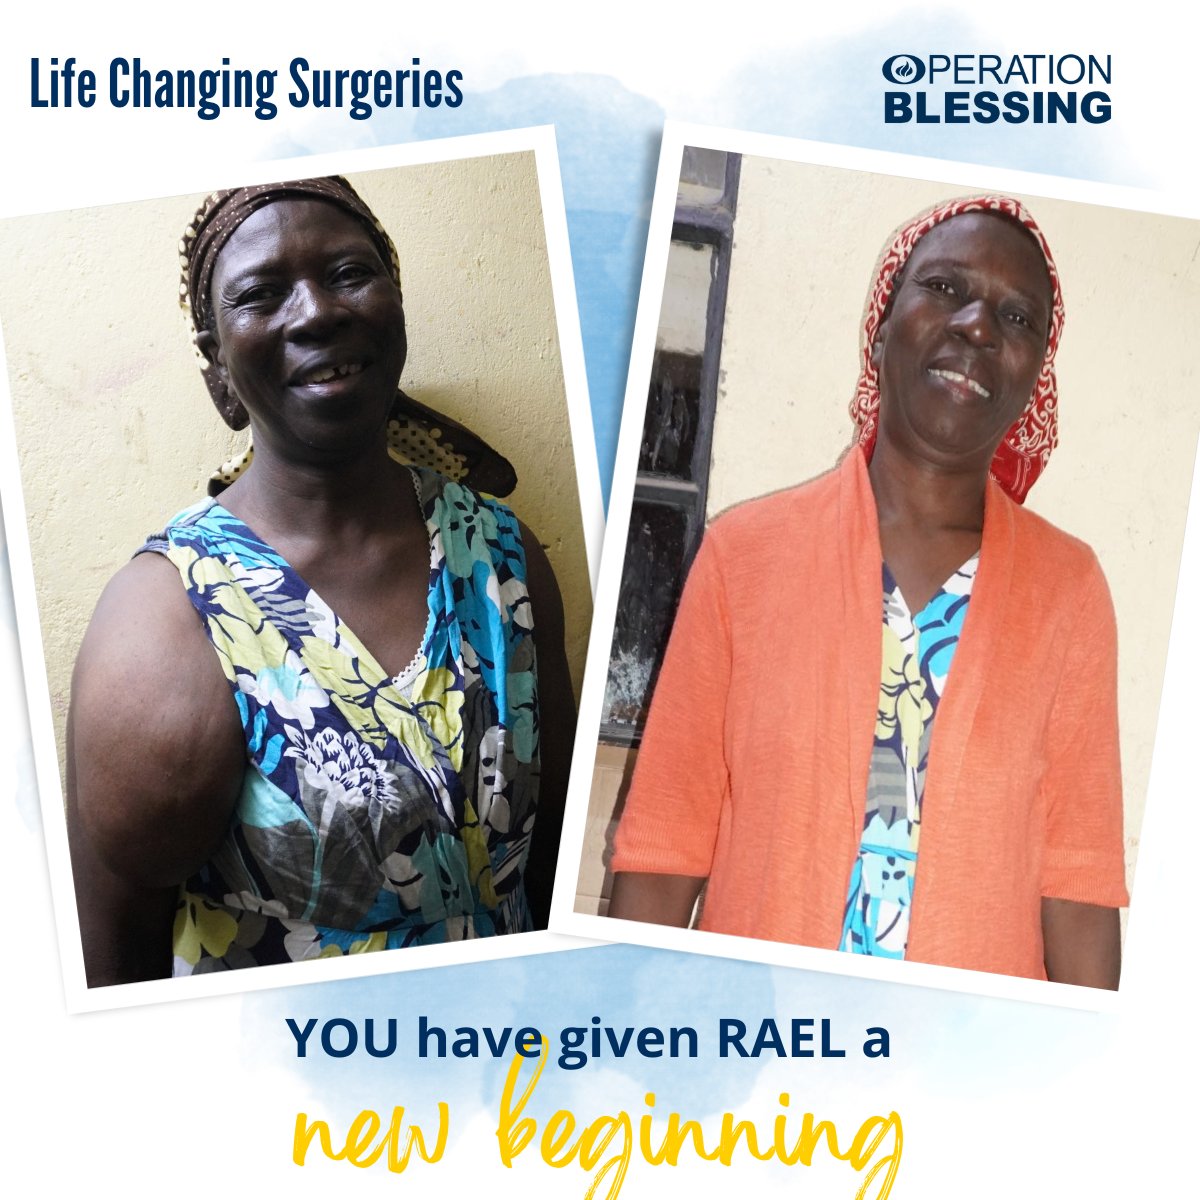 Thanks to friends like you, Rael in Kenya had surgery to heal the lipoma in her arm. She can fit into her clothes and work again to support her family. Plus, you have restored her confidence! Thank you for making a difference through #LifeChangingSurgeries!